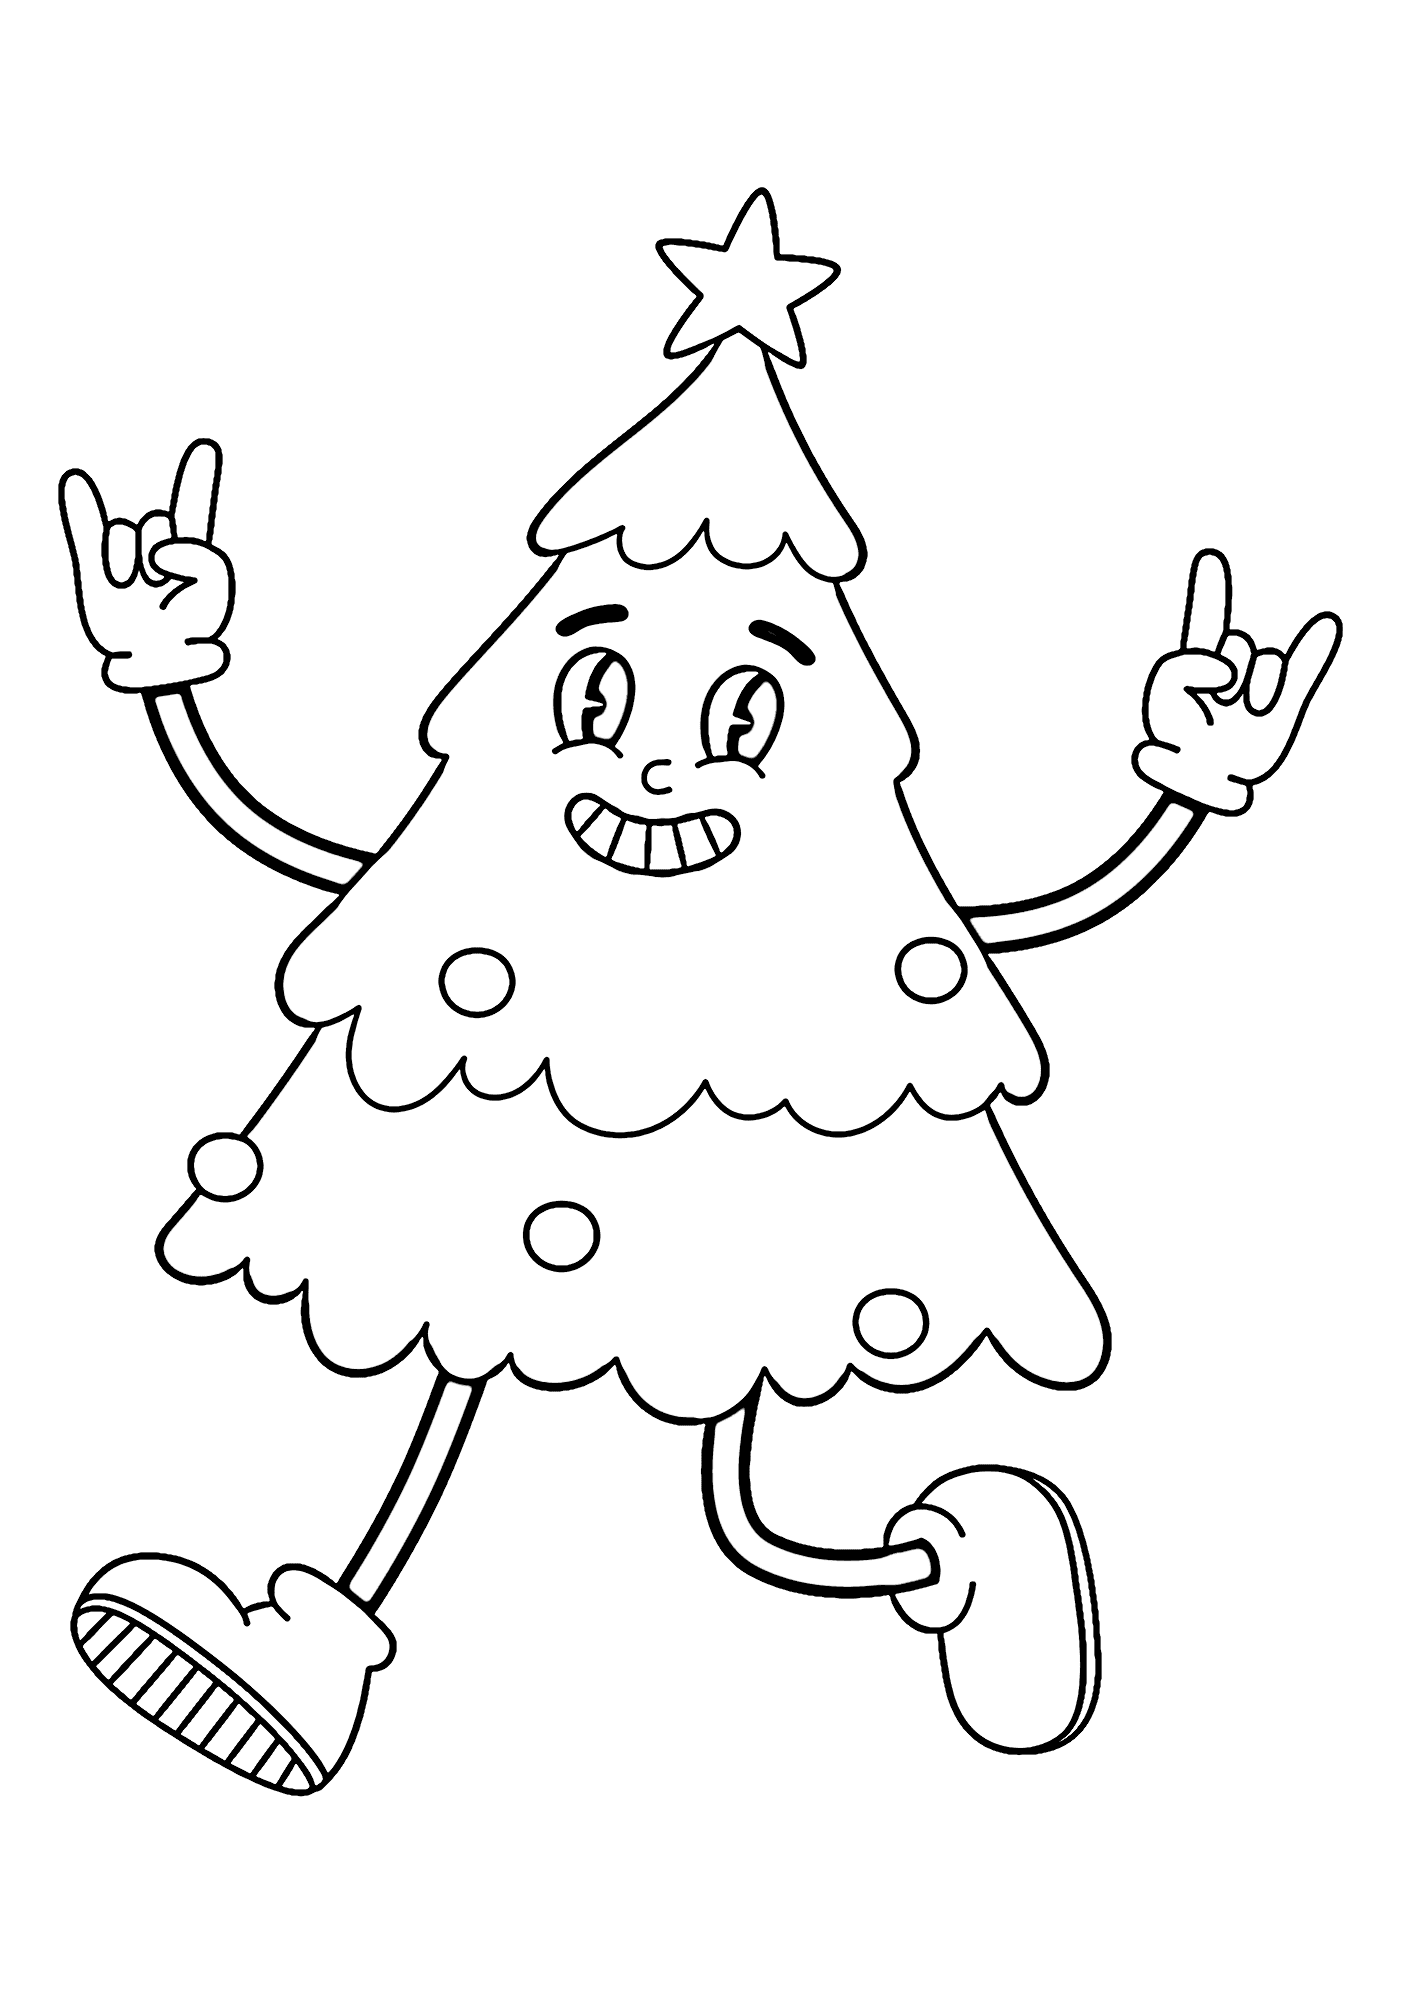 Cute Christmas Tree Coloring Page